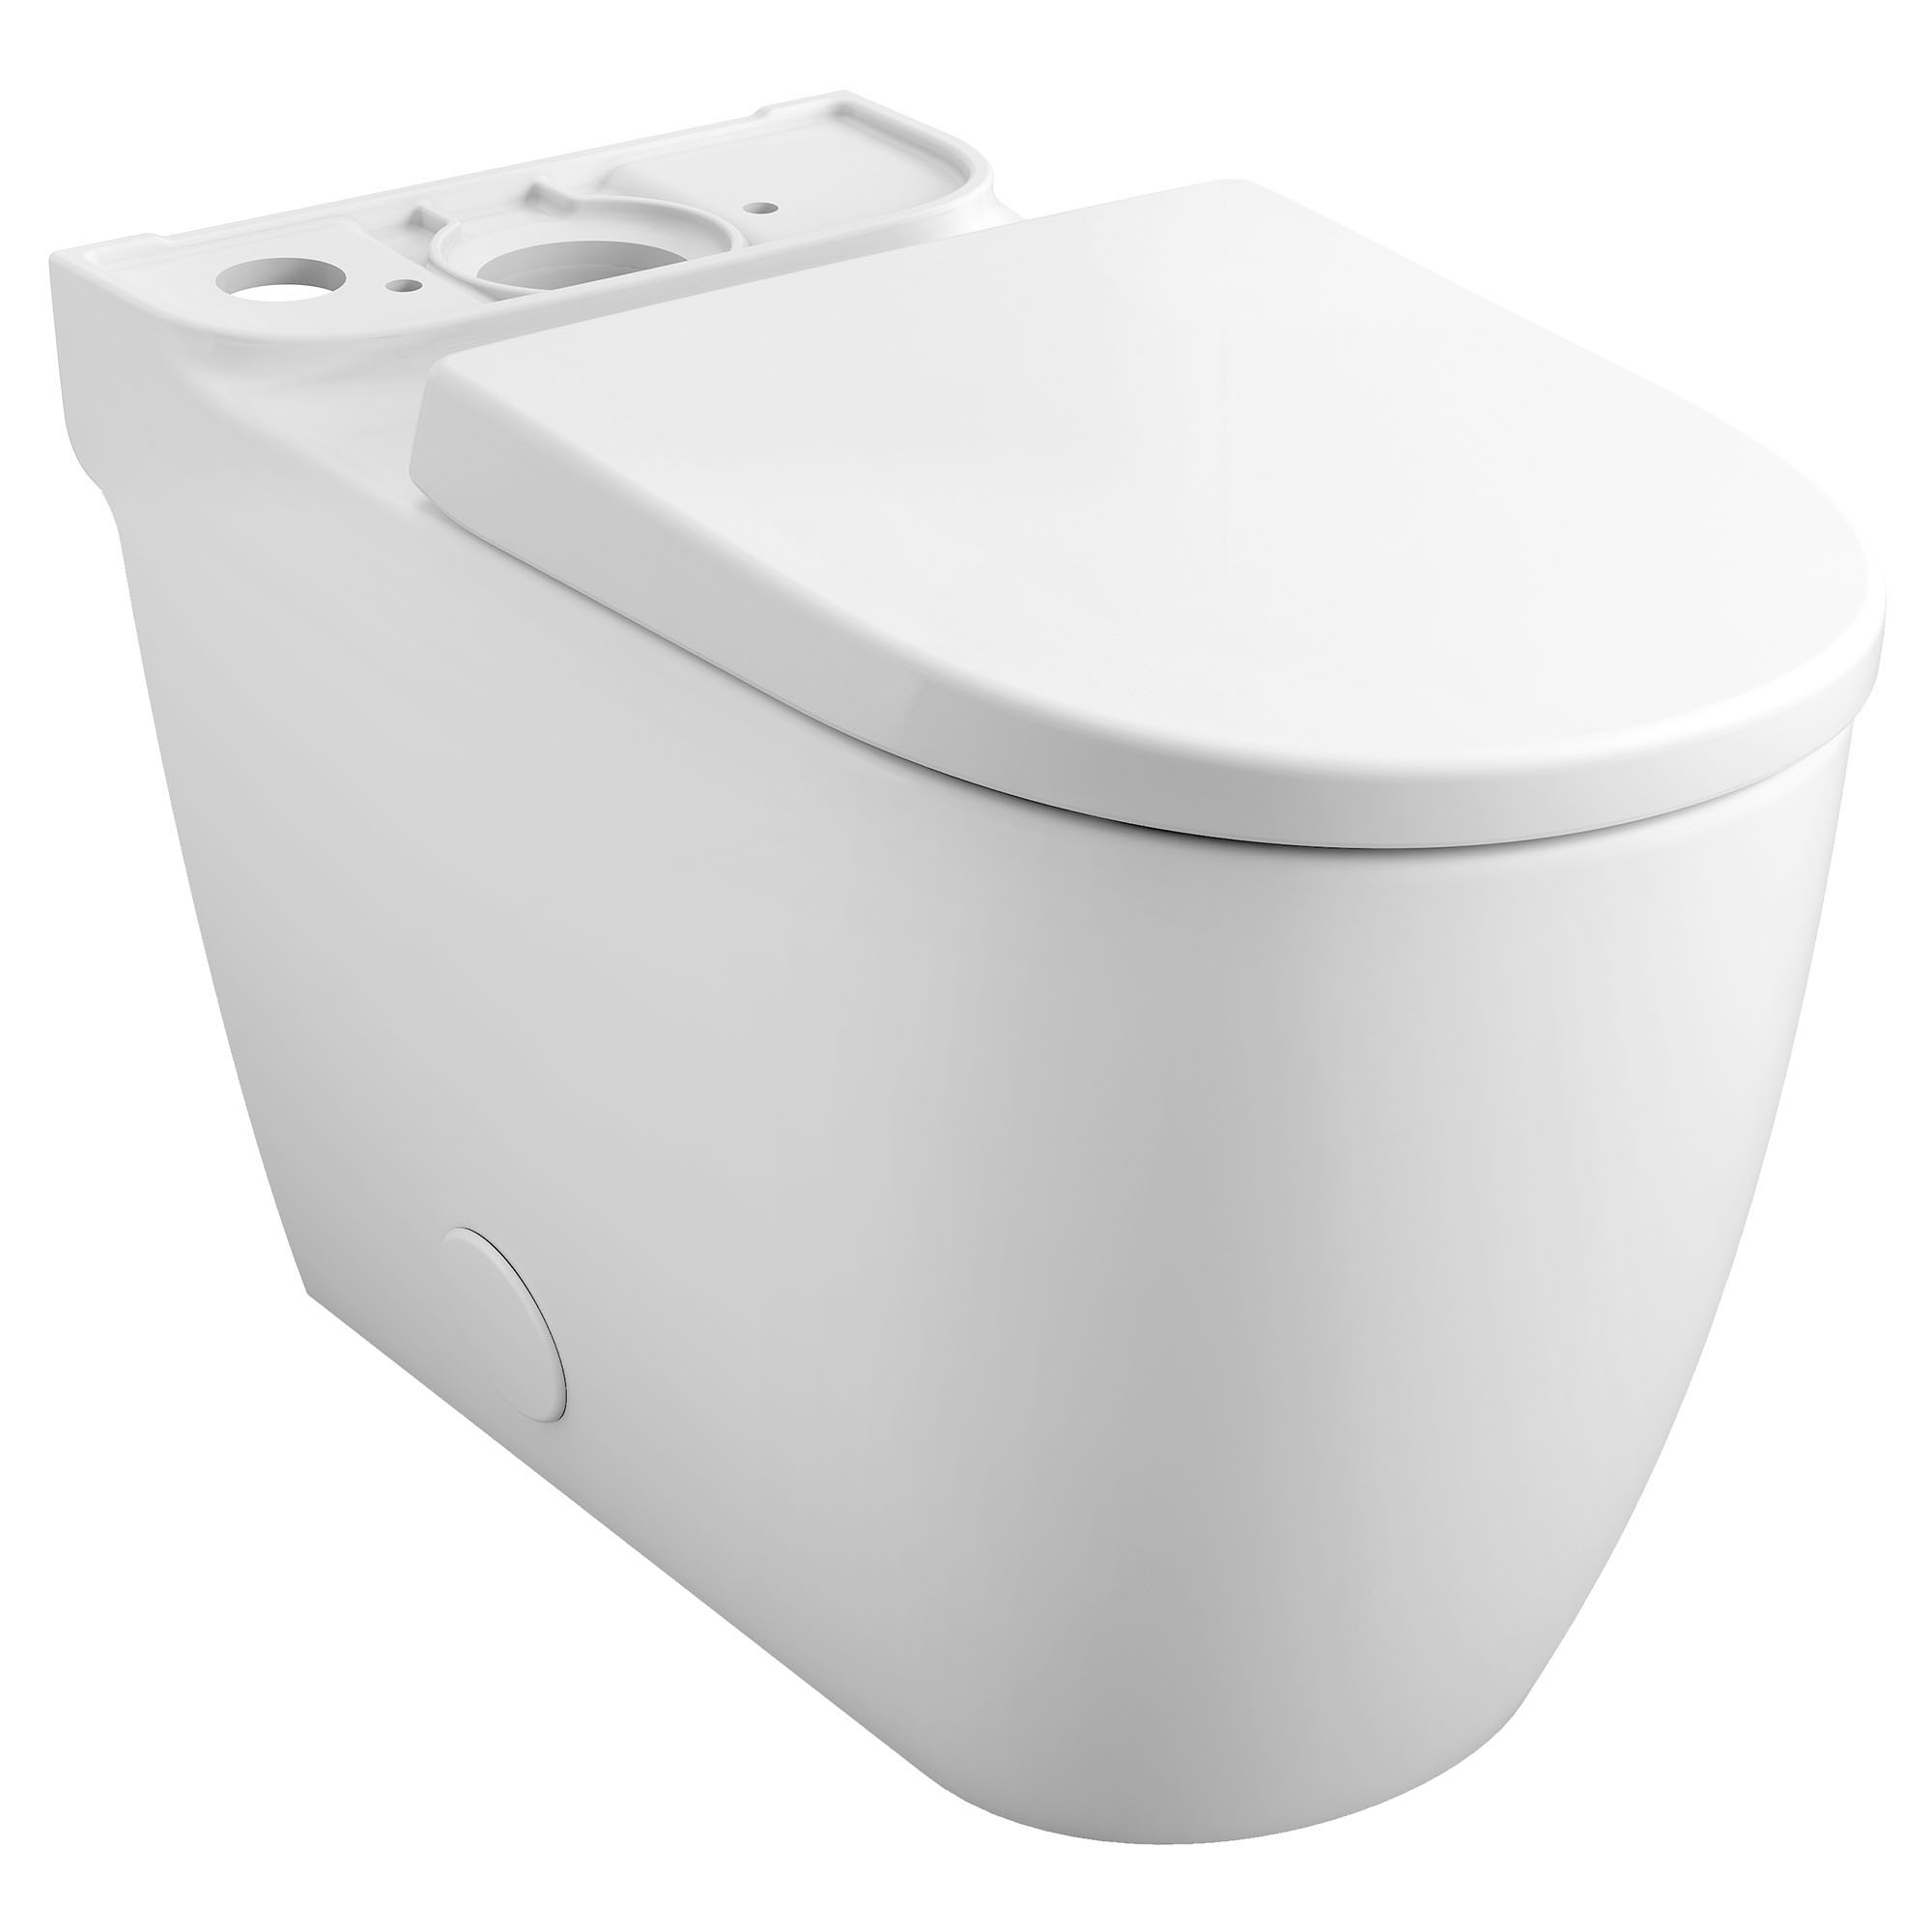 Essence Alpine White ADA Height Elongated Toilet Bowl Only w/Seat  **SEAT NOT INCLUDED**